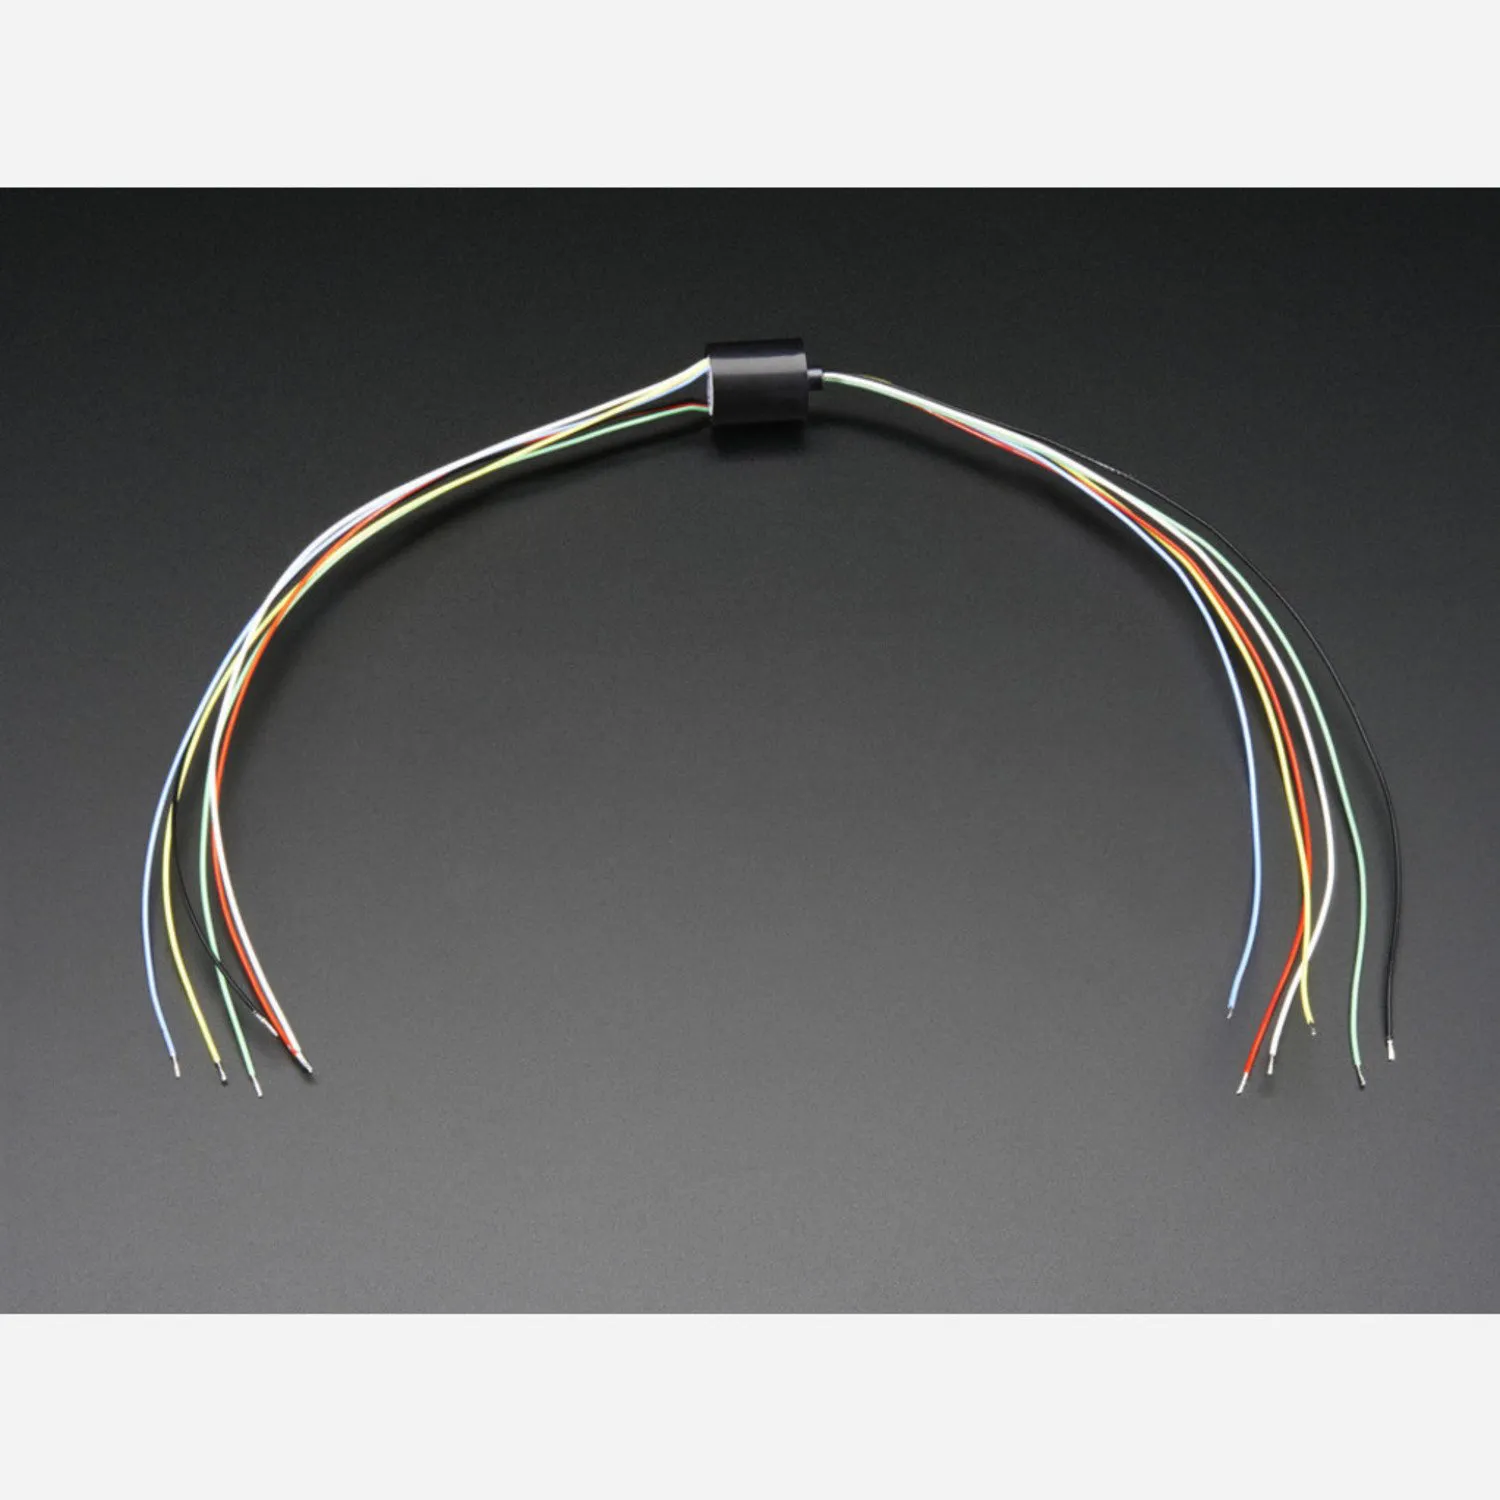 Photo of Miniature Slip Ring - 12mm diameter, 6 wires, max 240V @ 2A